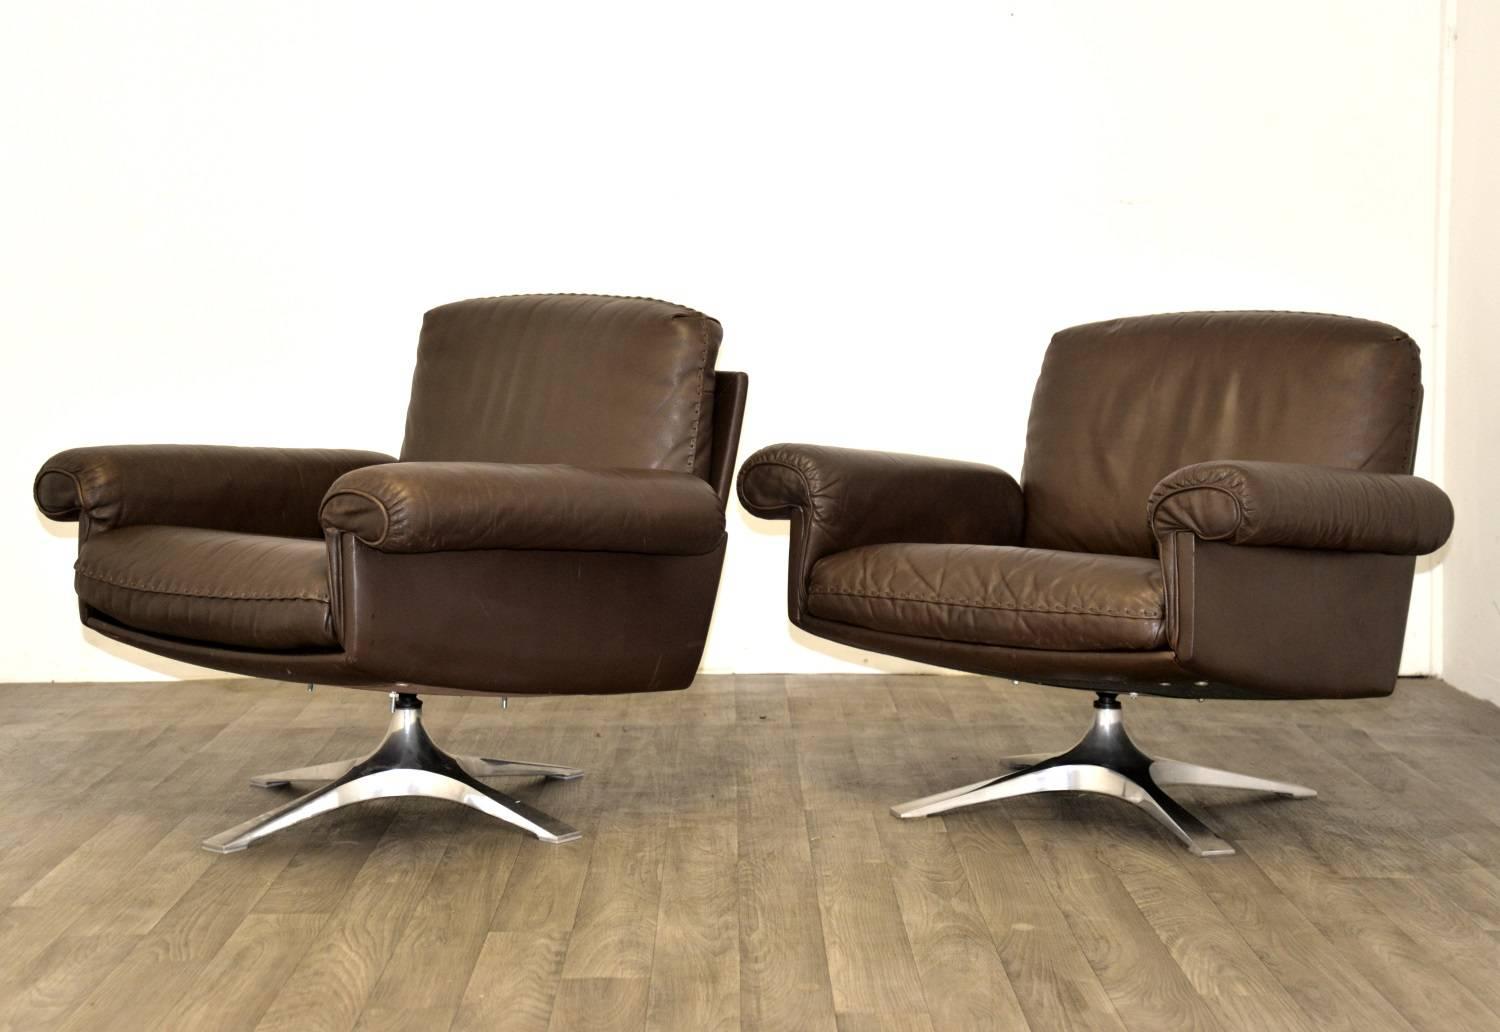 Discounted airfreight for our US and International customers ( from 2 weeks door to door)

We are delighted to bring to you a pair of vintage 1970`s de Sede DS 31 lounge armchair in soft brown aniline leather with superb whipstitch edge detail.